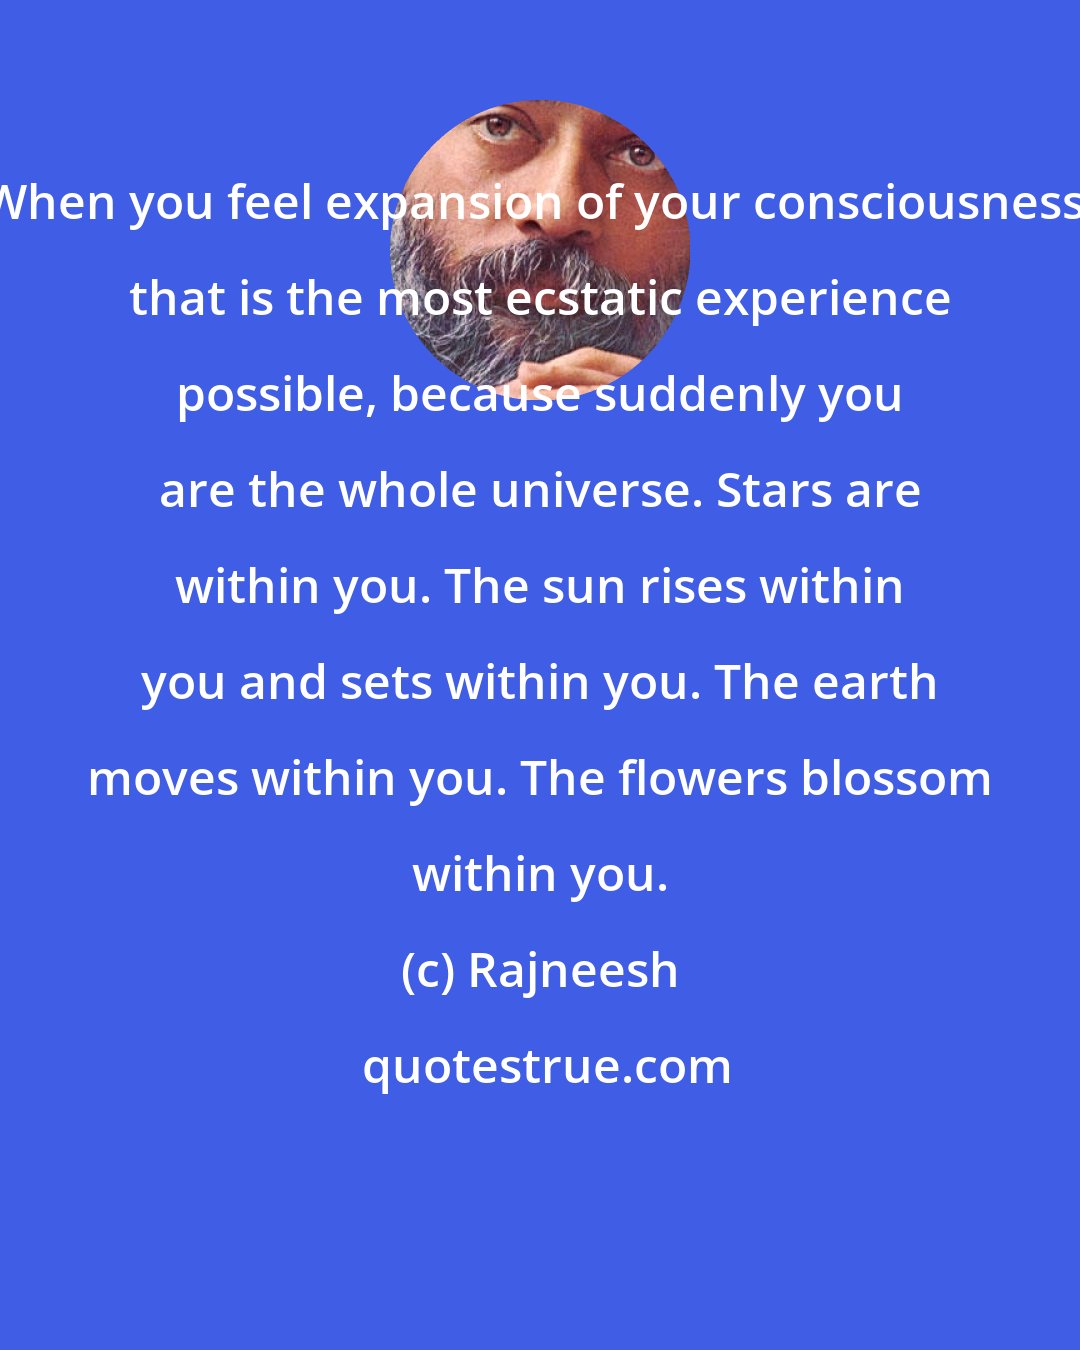 Rajneesh: When you feel expansion of your consciousness, that is the most ecstatic experience possible, because suddenly you are the whole universe. Stars are within you. The sun rises within you and sets within you. The earth moves within you. The flowers blossom within you.